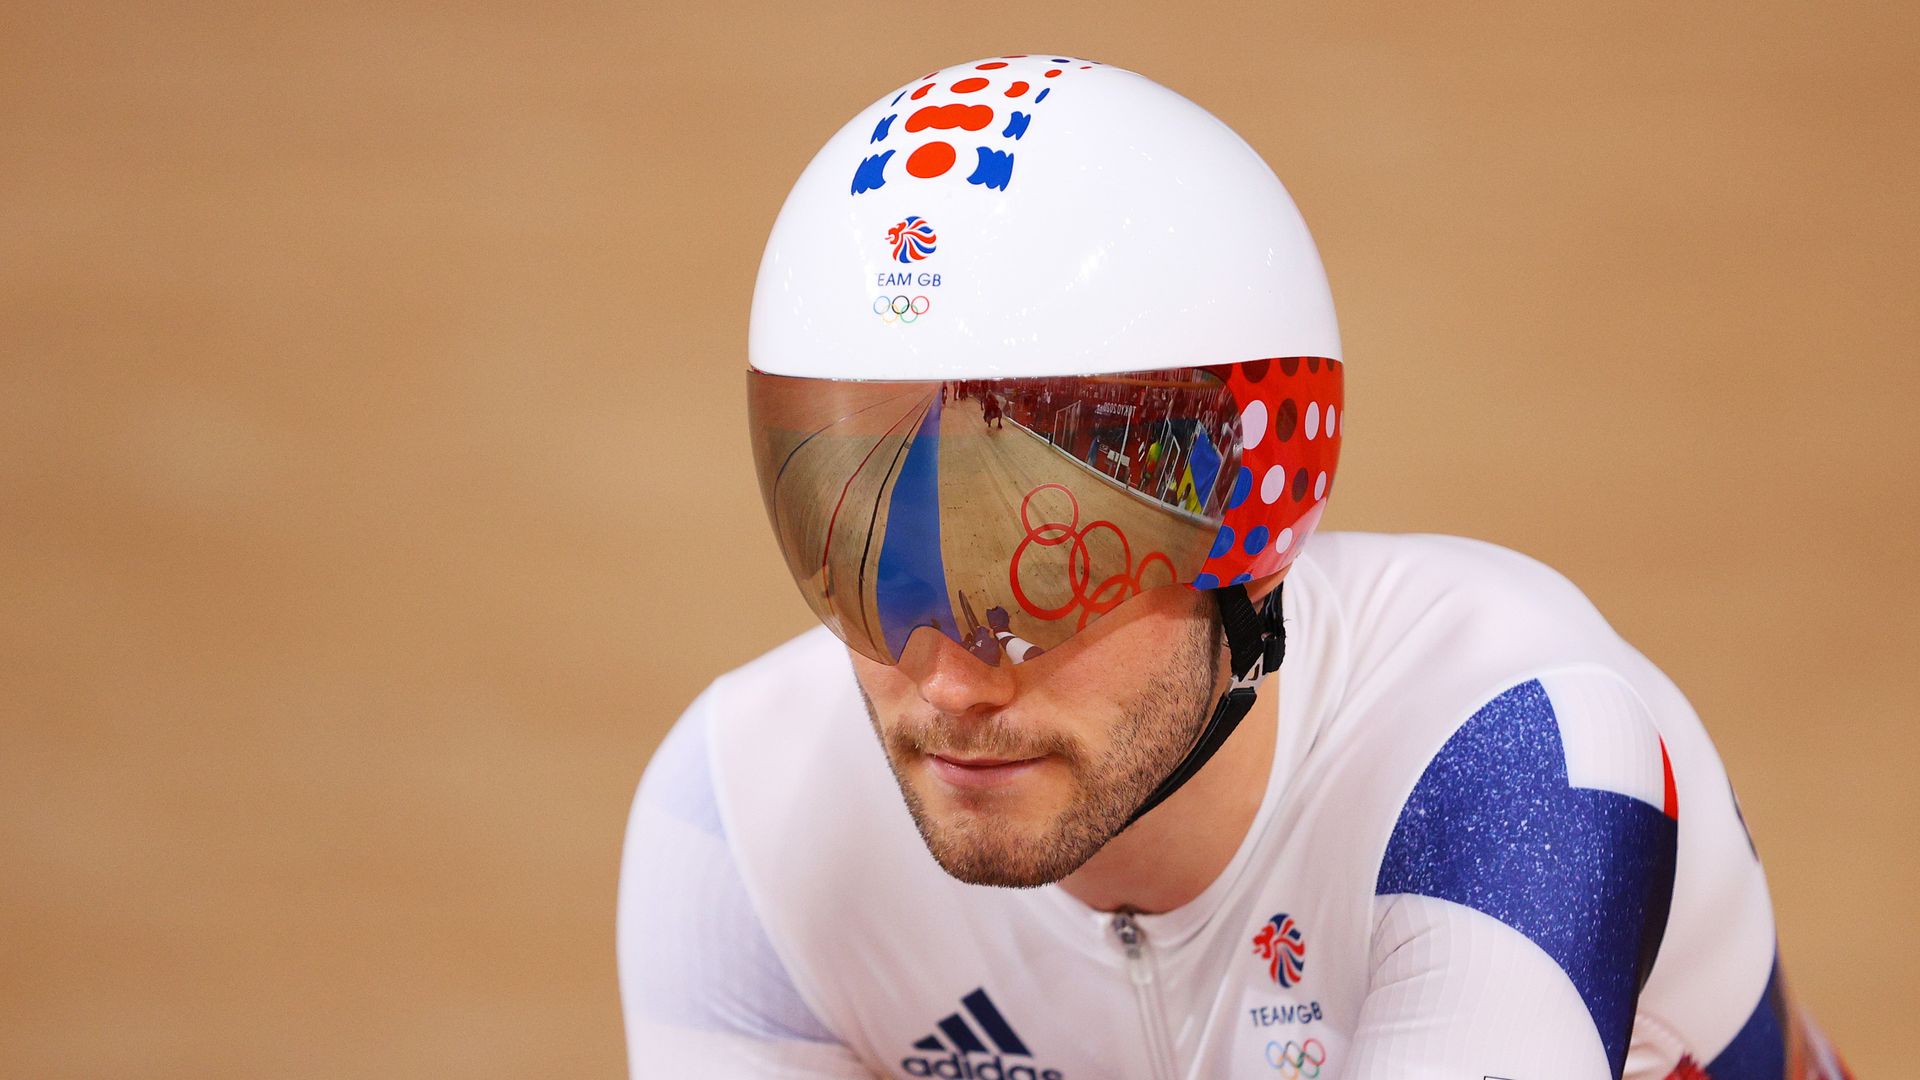 Walls wins gold for Team GB in omnium cycling